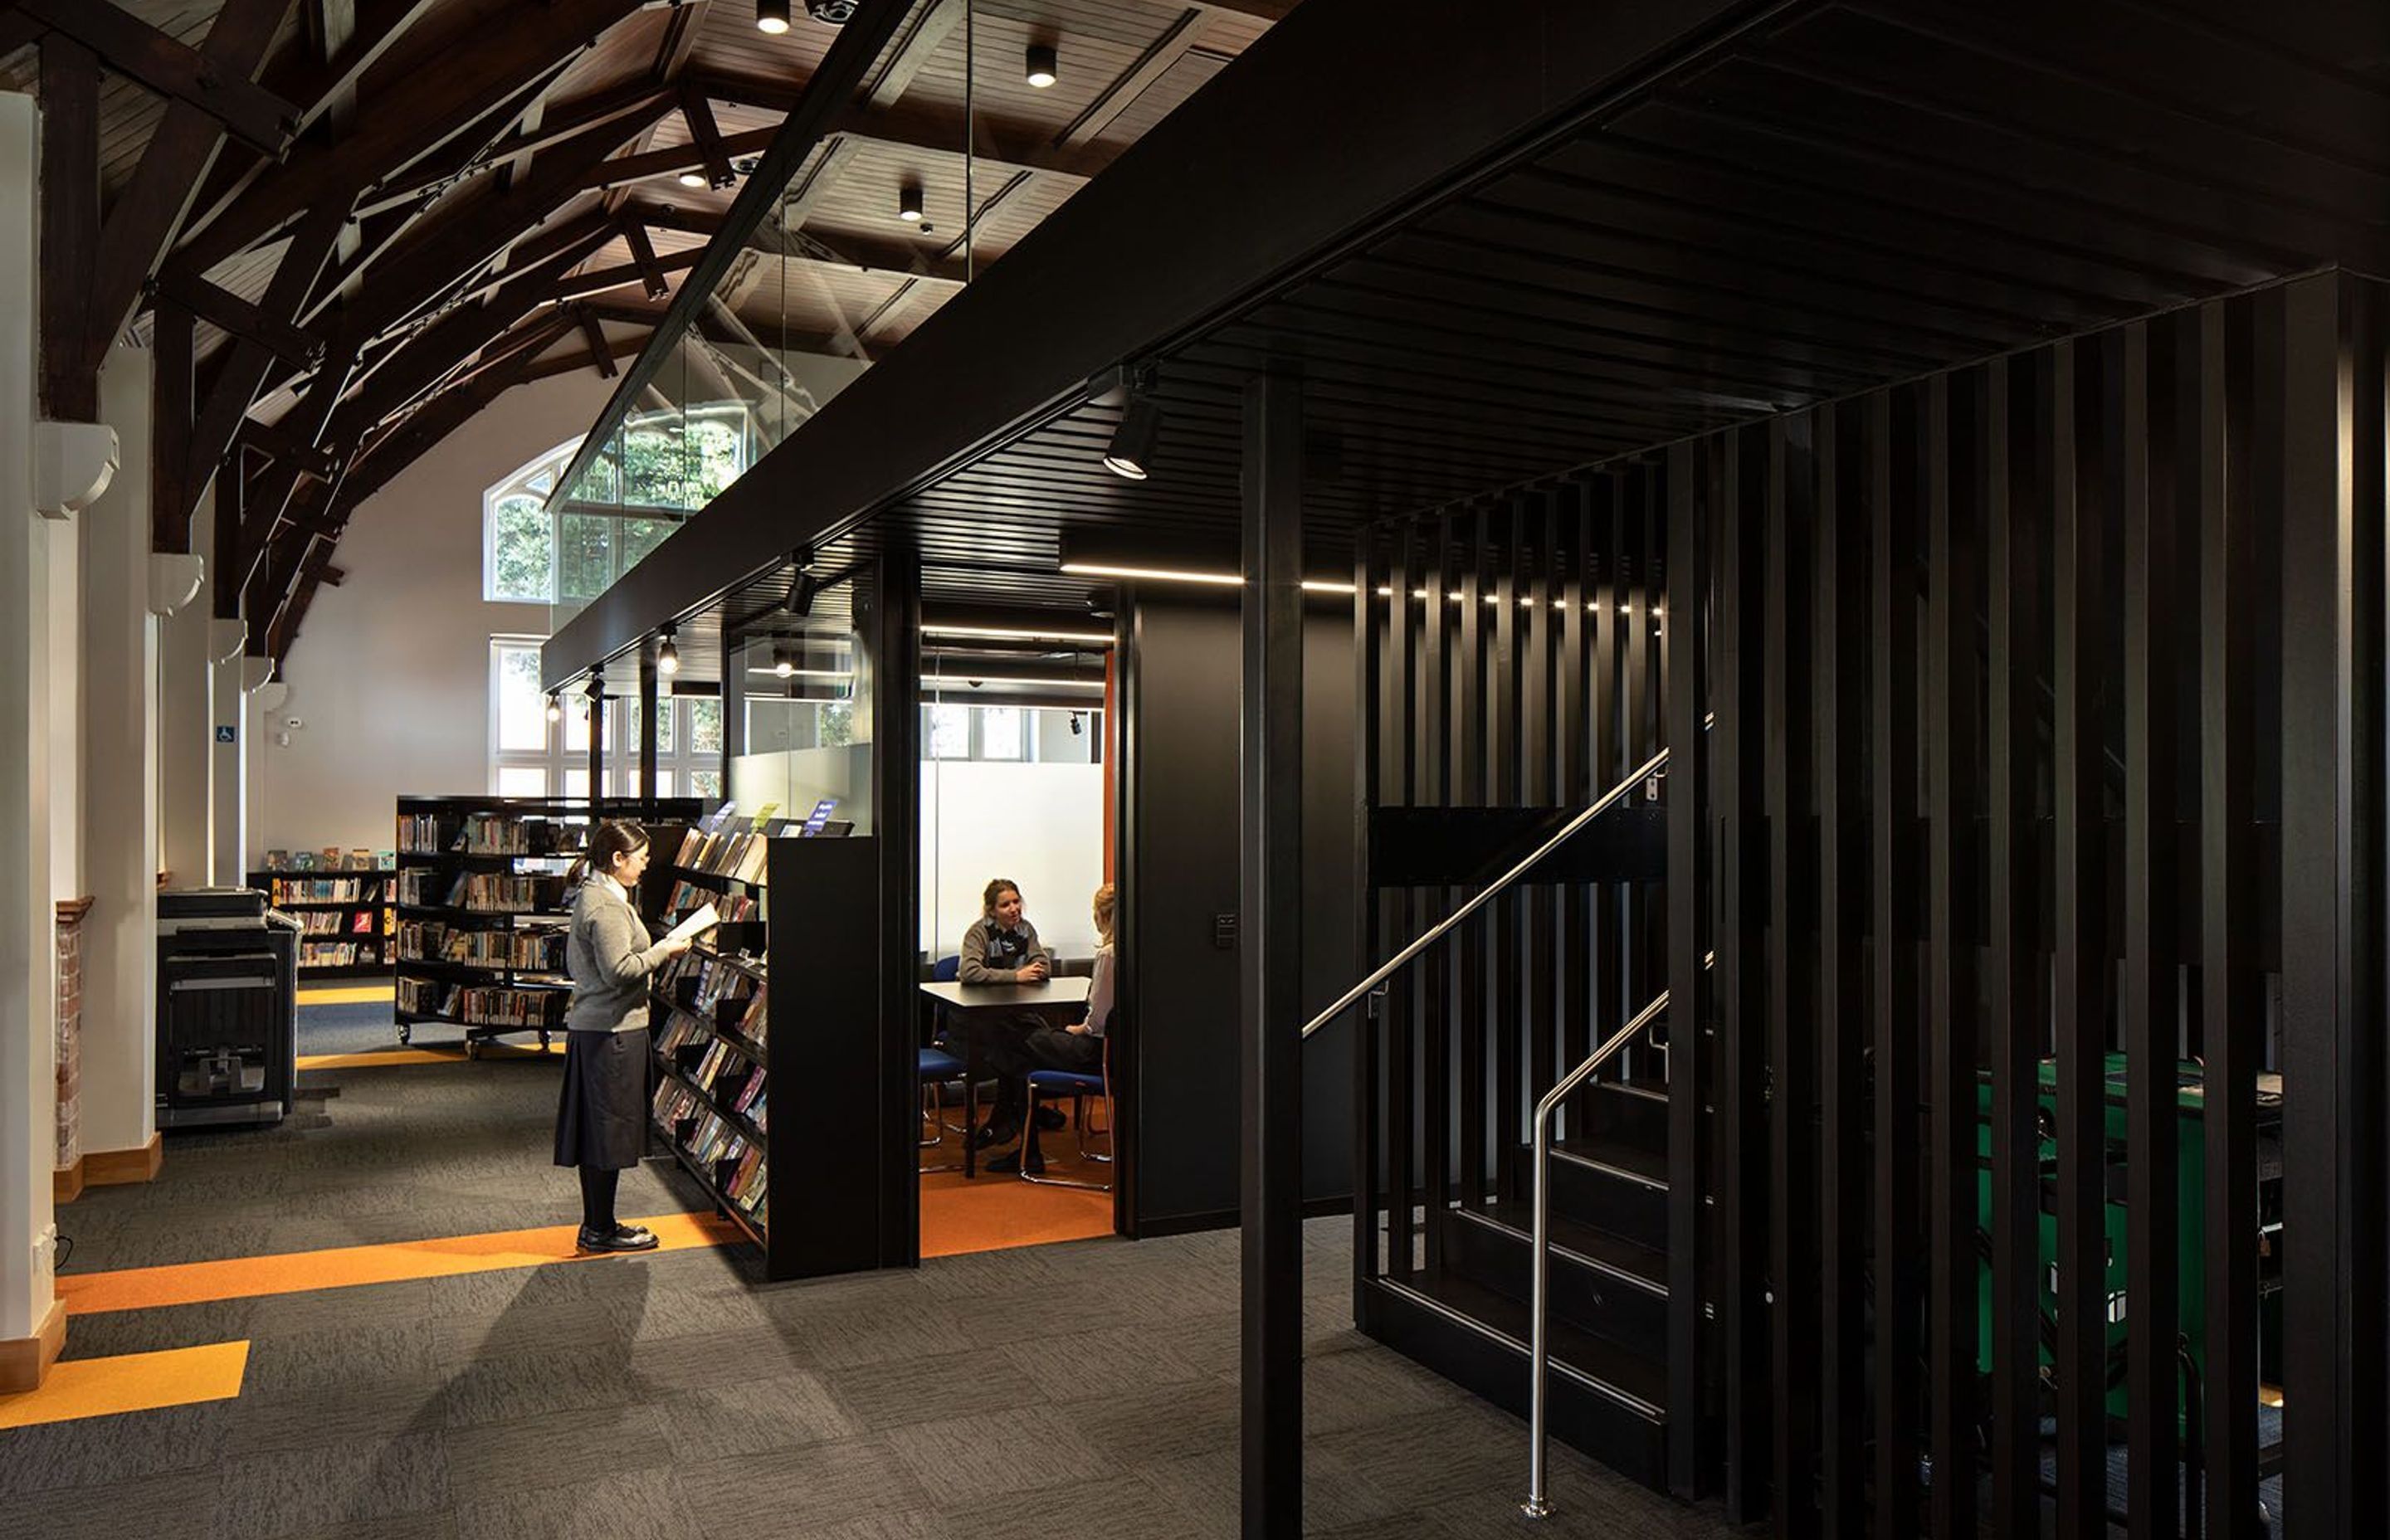 In the restored heritage library, a contemporary 'floating' mezzanine is free of the oriignal structure, creating a happy marriage between new and old.